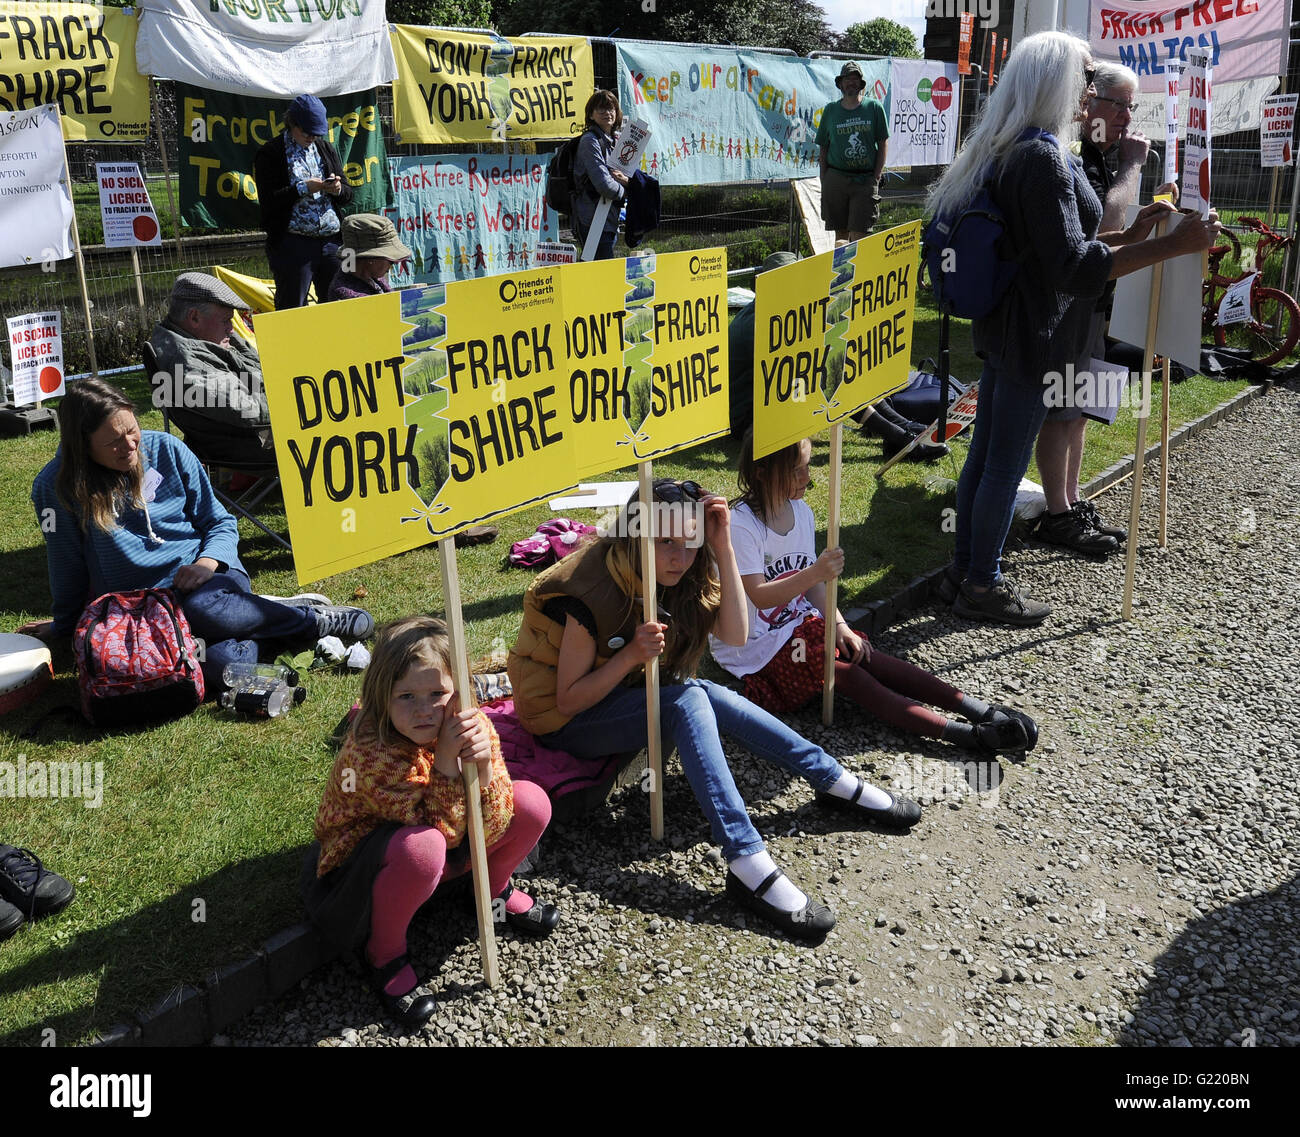 Protestors demonstrating against fracking gather outside County Hall, Northallerton, as the council meets to decide if fracking at sites in North Yorkshire should be allowed. Stock Photo